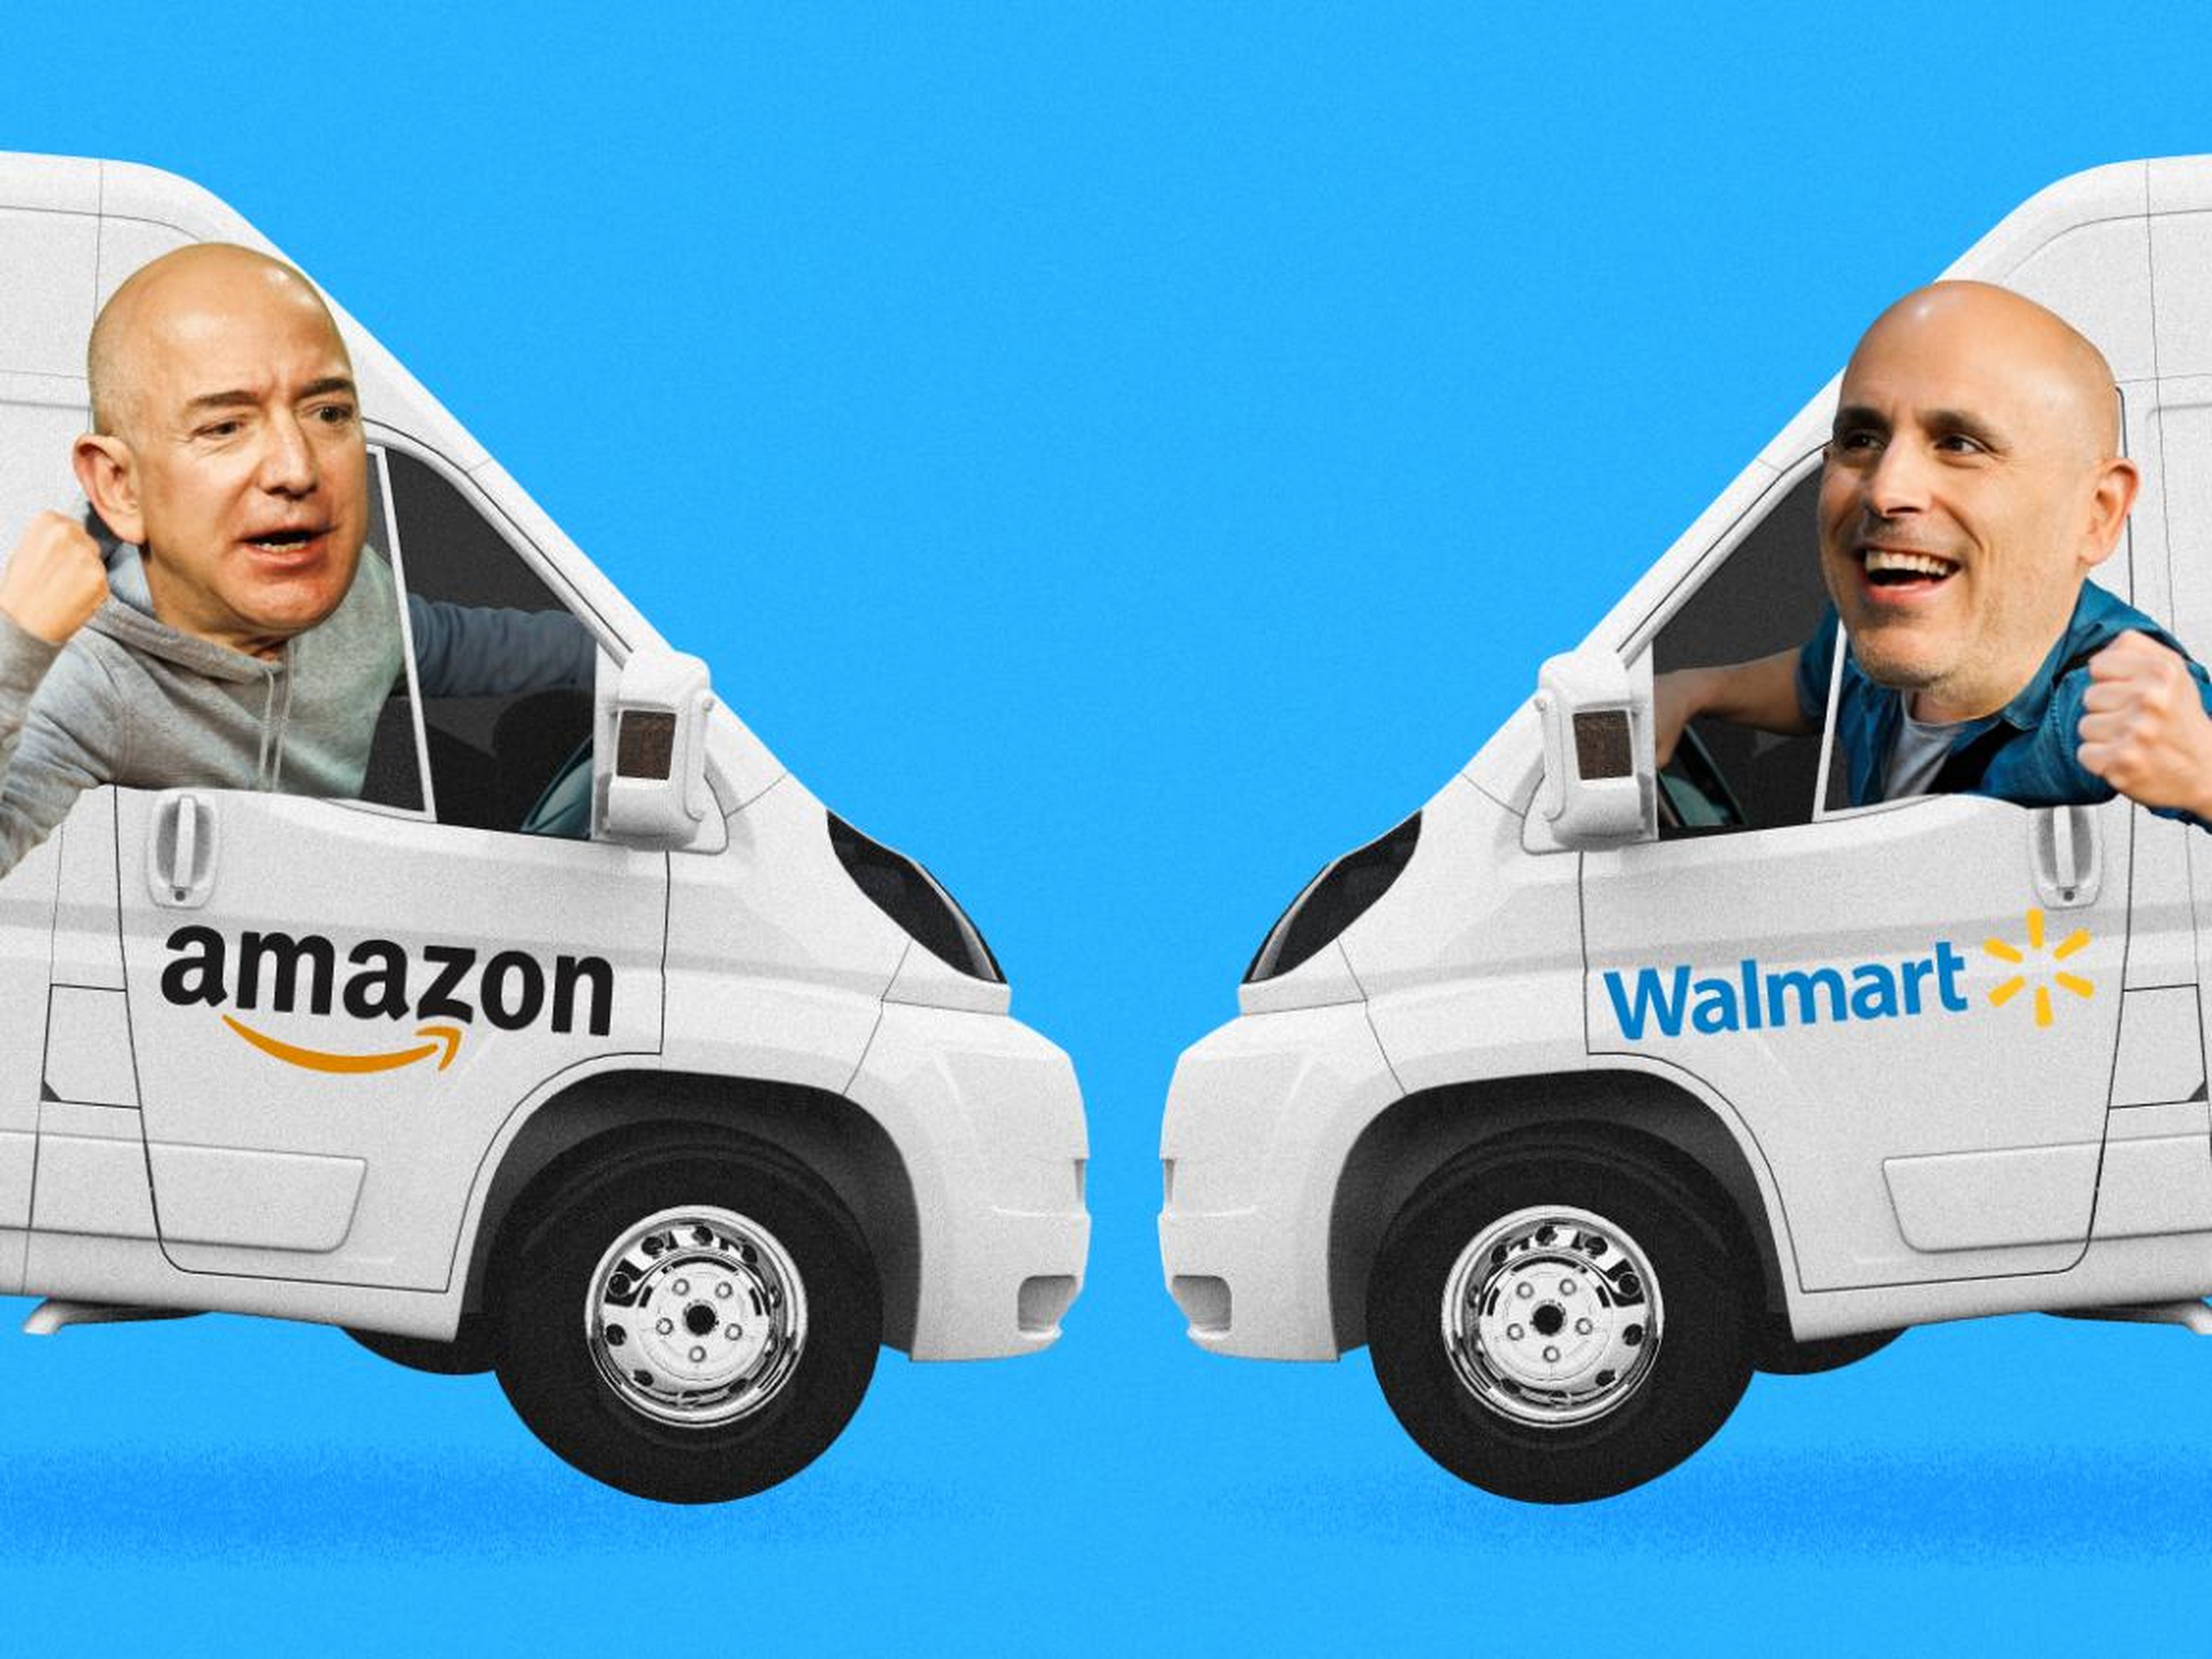 Amazon's core retail business continued to grow — in 2015, Amazon surpassed Walmart as the largest retailer in the US.